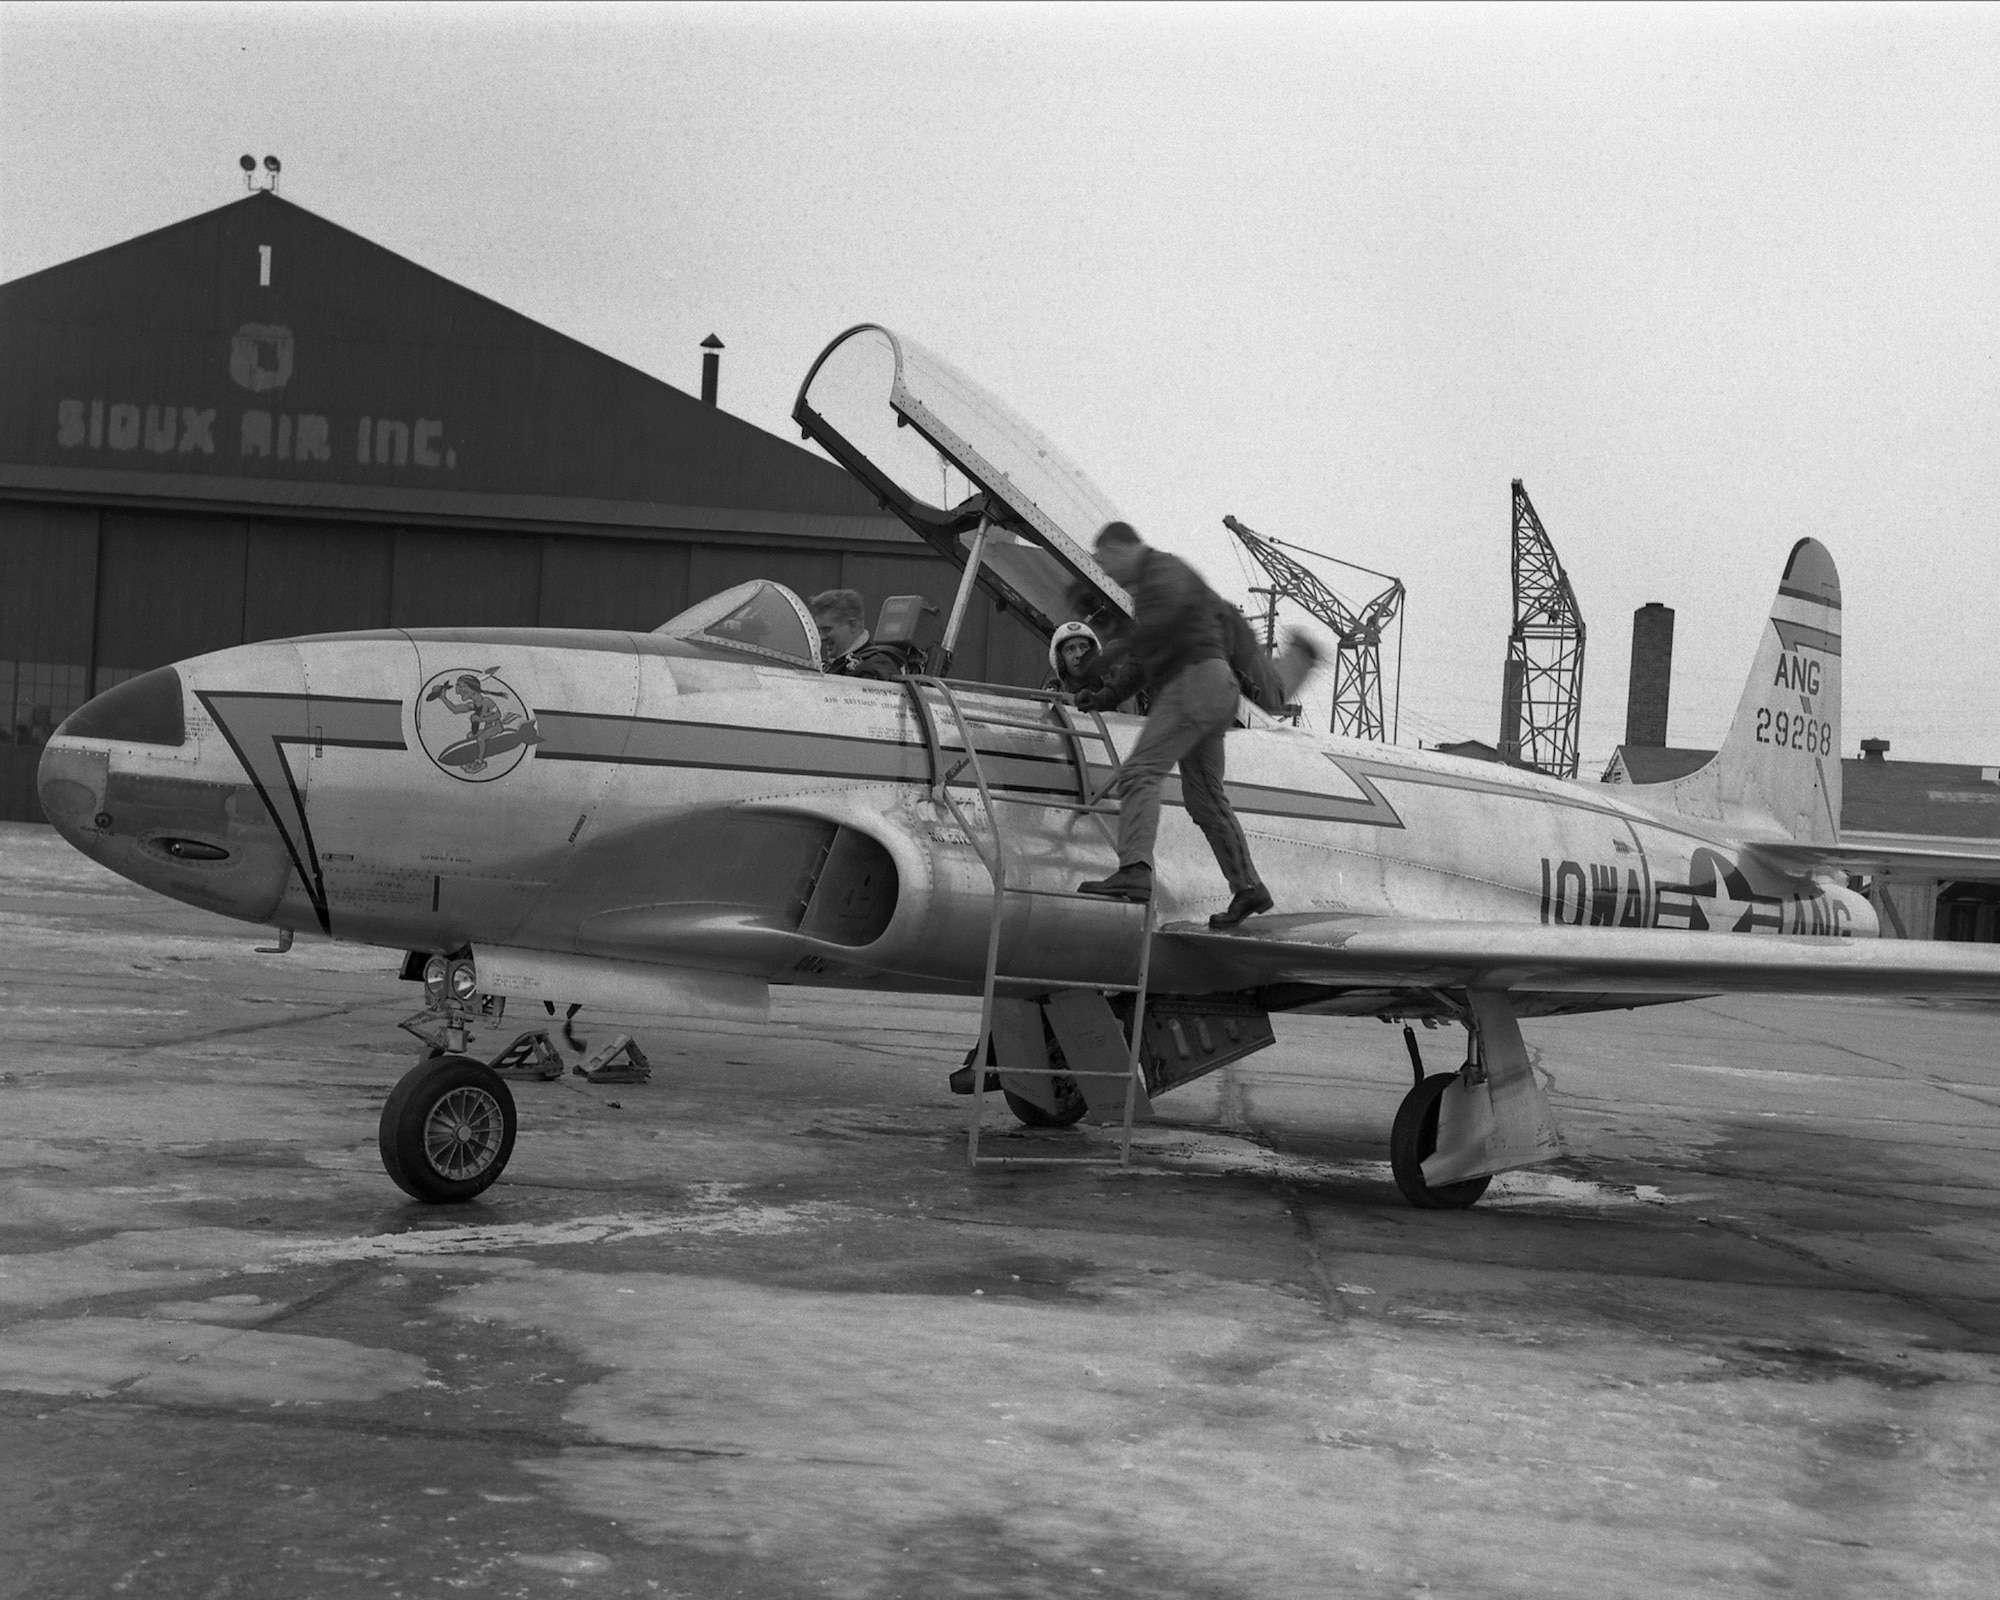 A U.S. Air Force F-80 Shooting Star assigned to the 174th Fighter Squadron, Iowa Air National Guard is on the ramp in Sioux City, Iowa in July, 1955. The Air National Guard squadron received the F-80 after the unit returned to Sioux City following an activation during the Korean War.
185th ARW Photo/ Released
